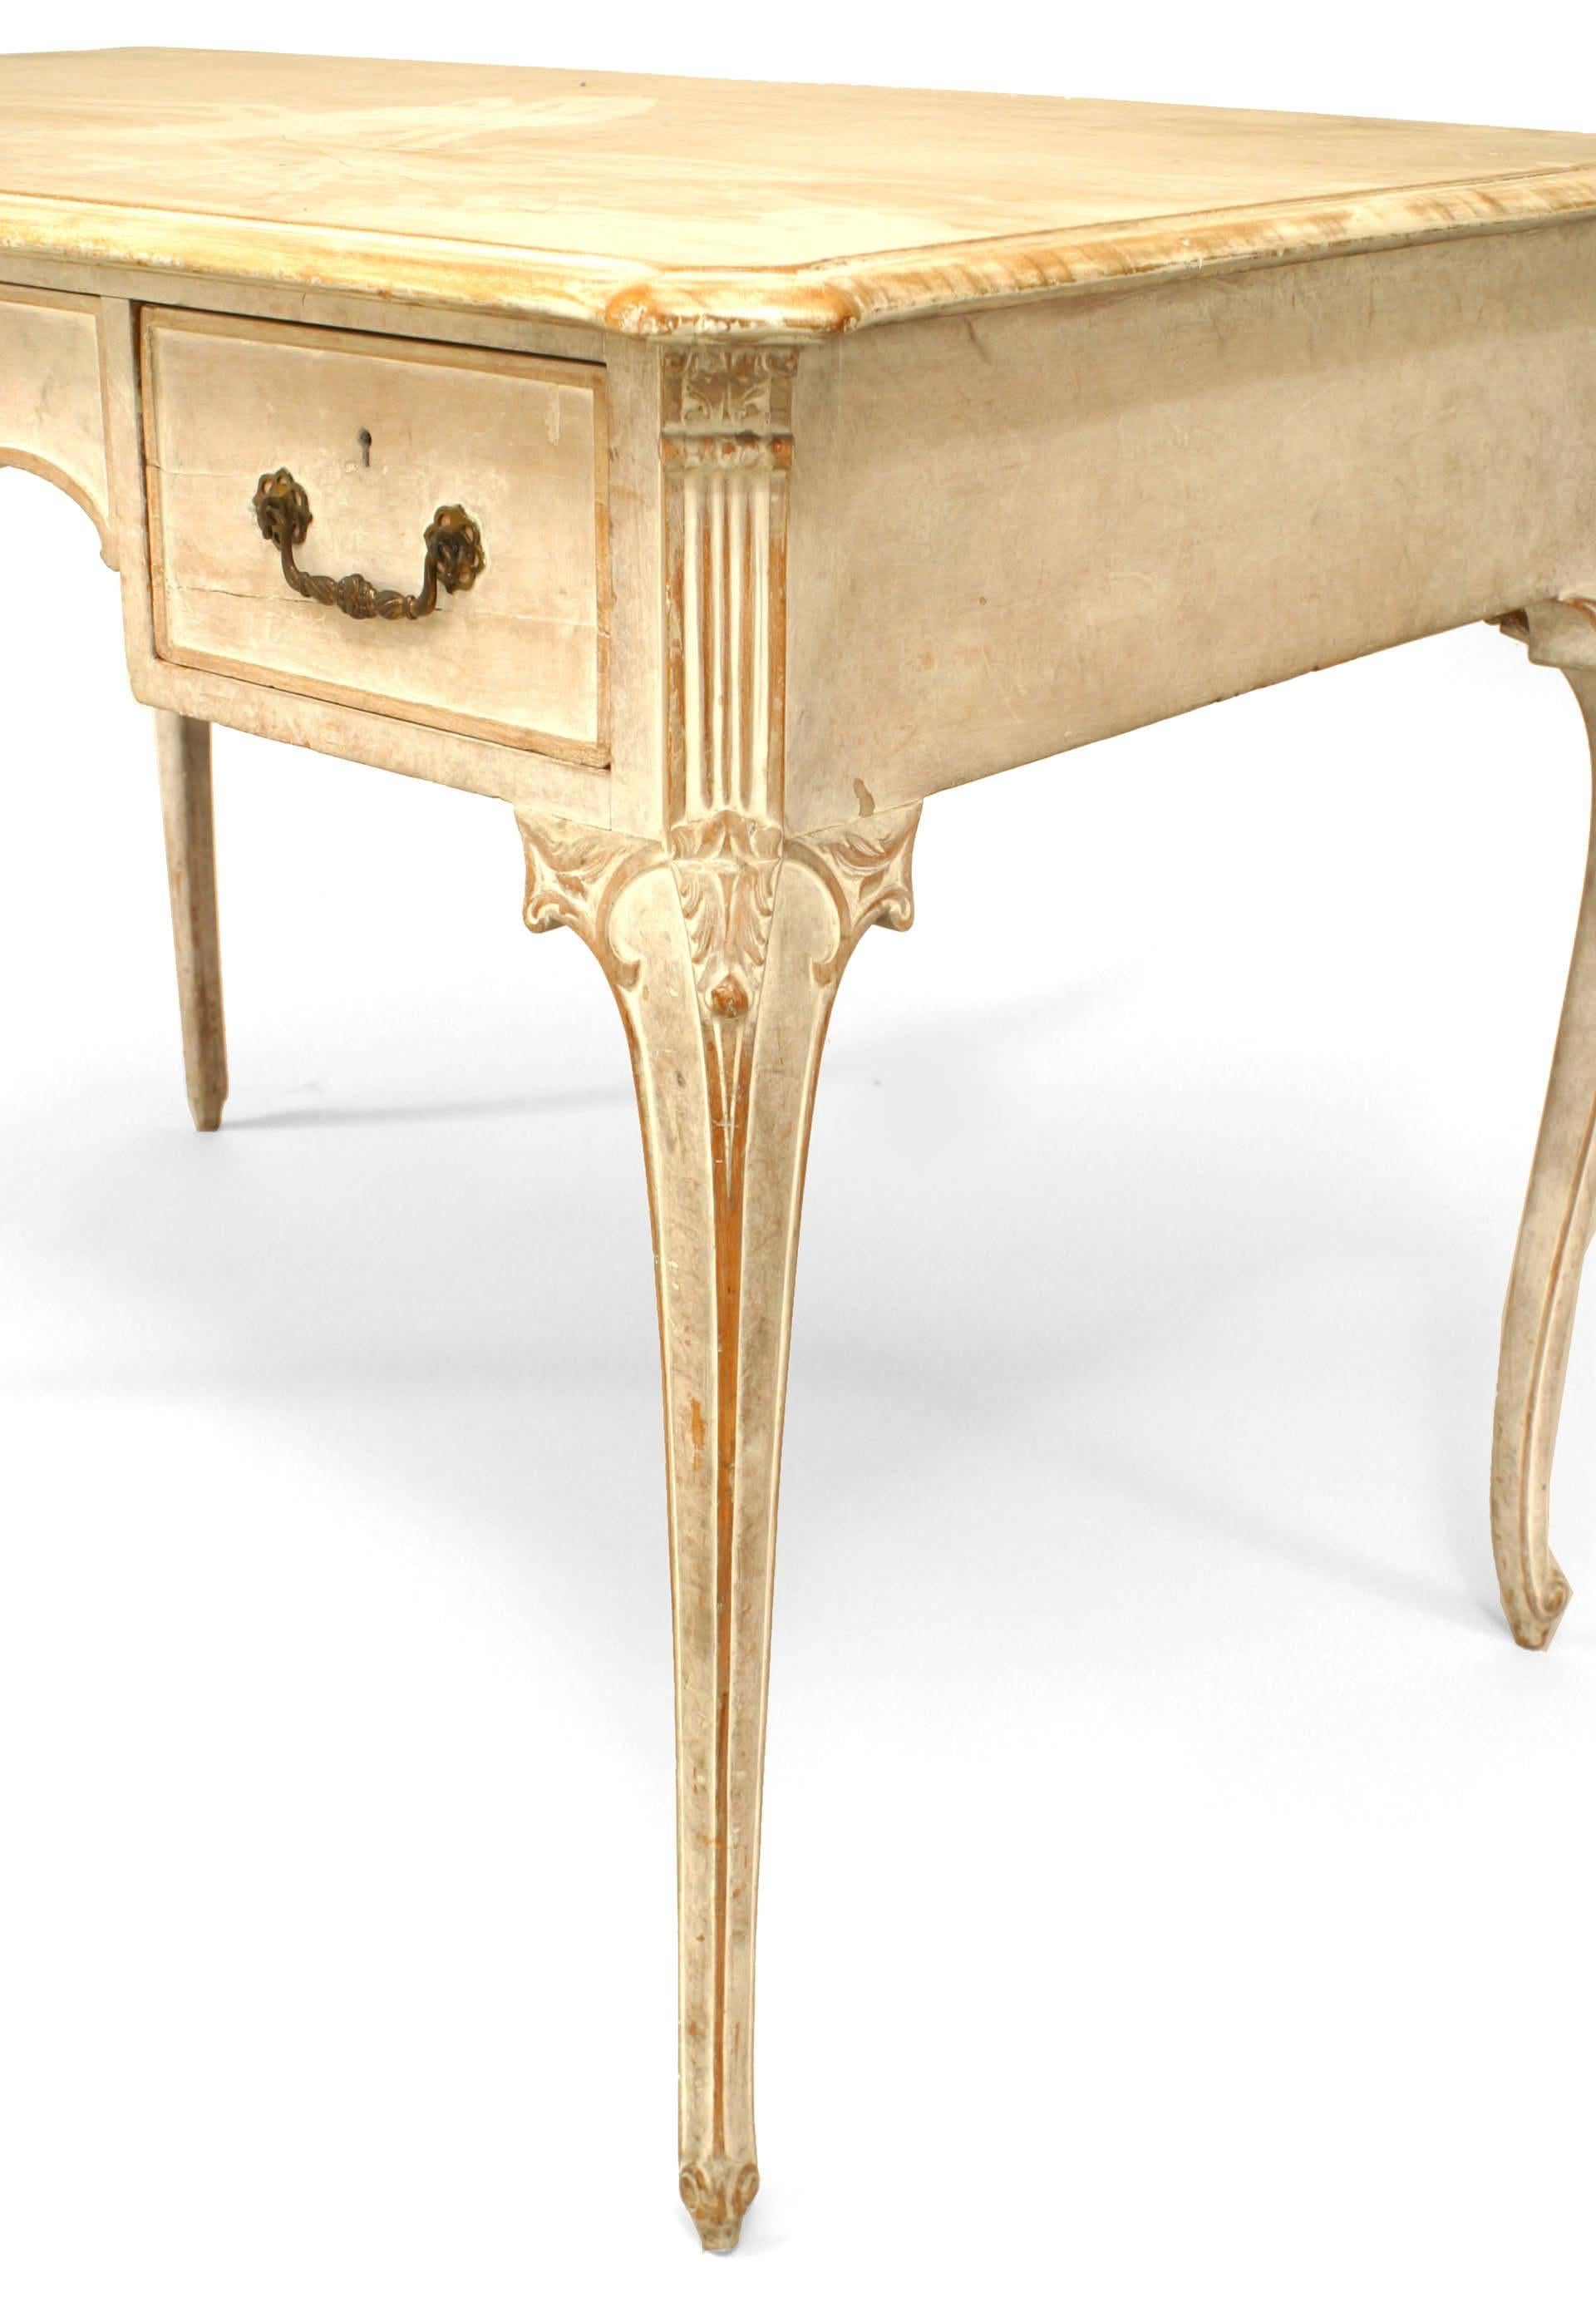 French Louis XV-style (19/20th Century) bleached dressing table with 3 drawers.
